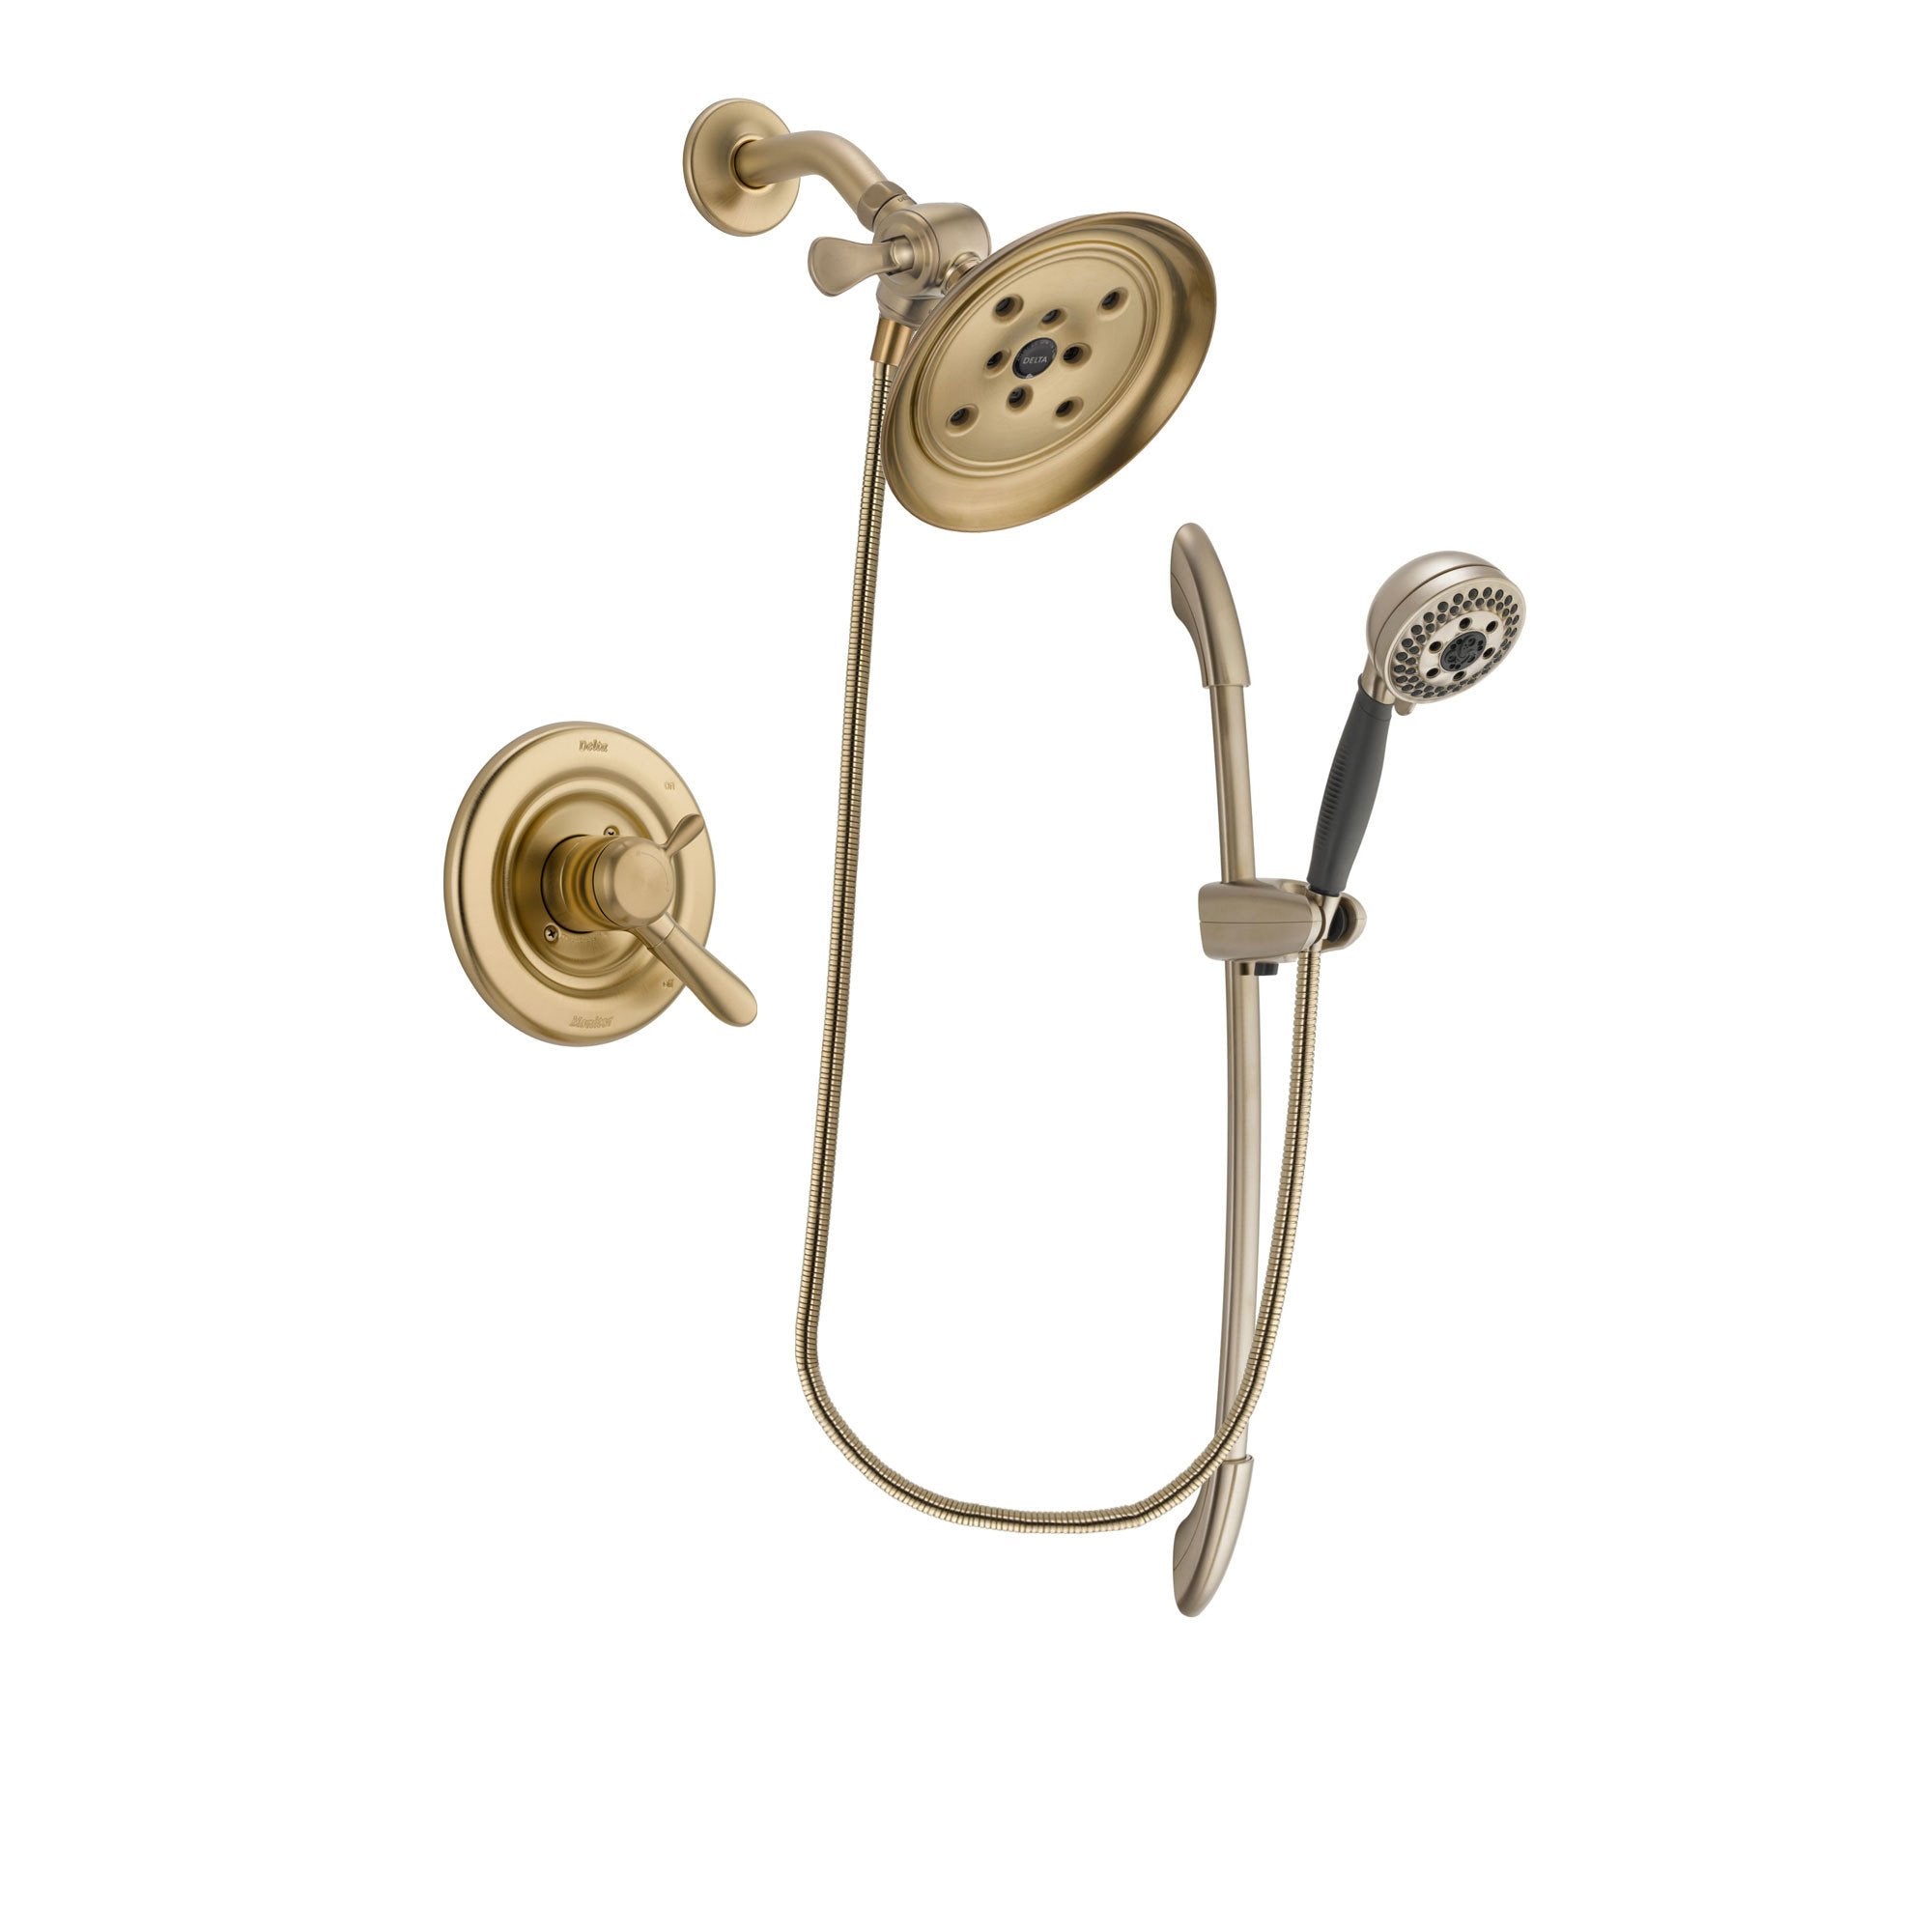 Delta Lahara Champagne Bronze Finish Dual Control Shower Faucet System Package with Large Rain Shower Head and 5-Spray Handshower with Slide Bar Includes Rough-in Valve DSP3386V